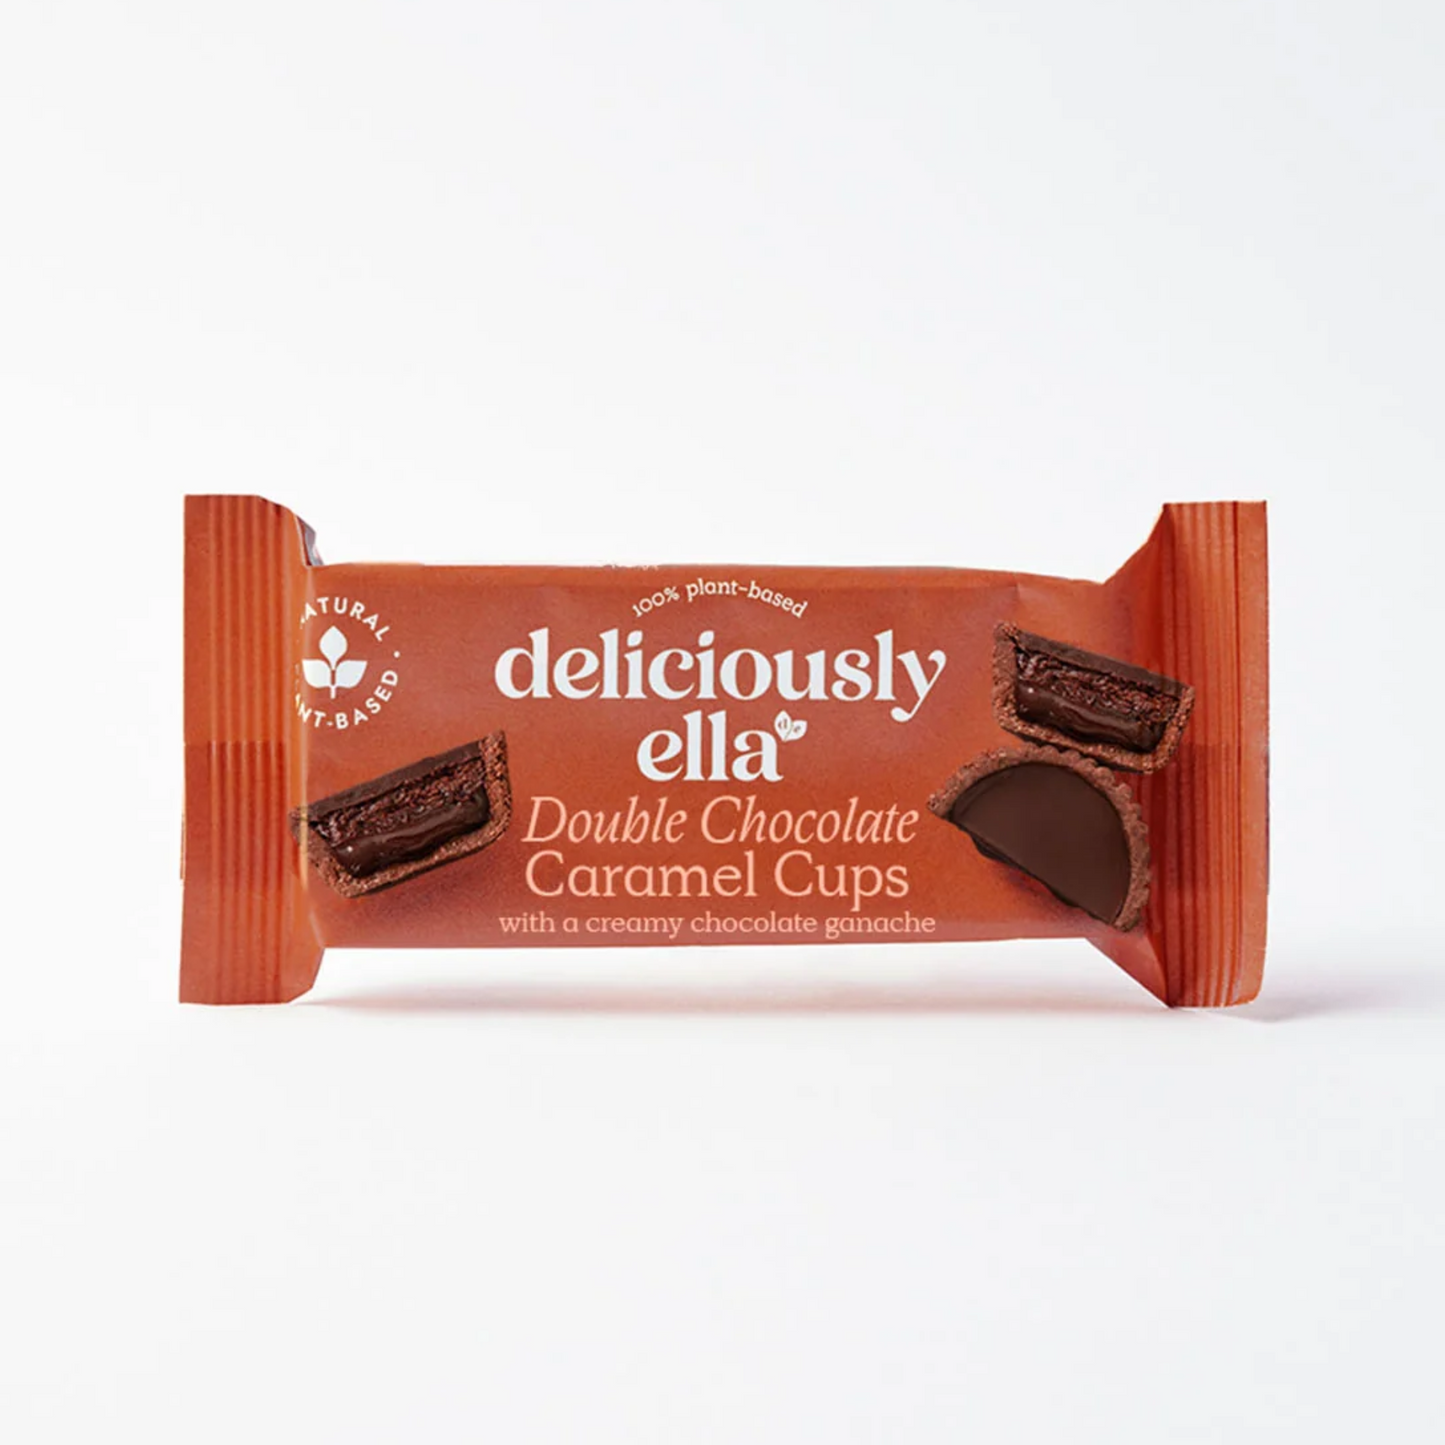 Double chocolate caramel cup